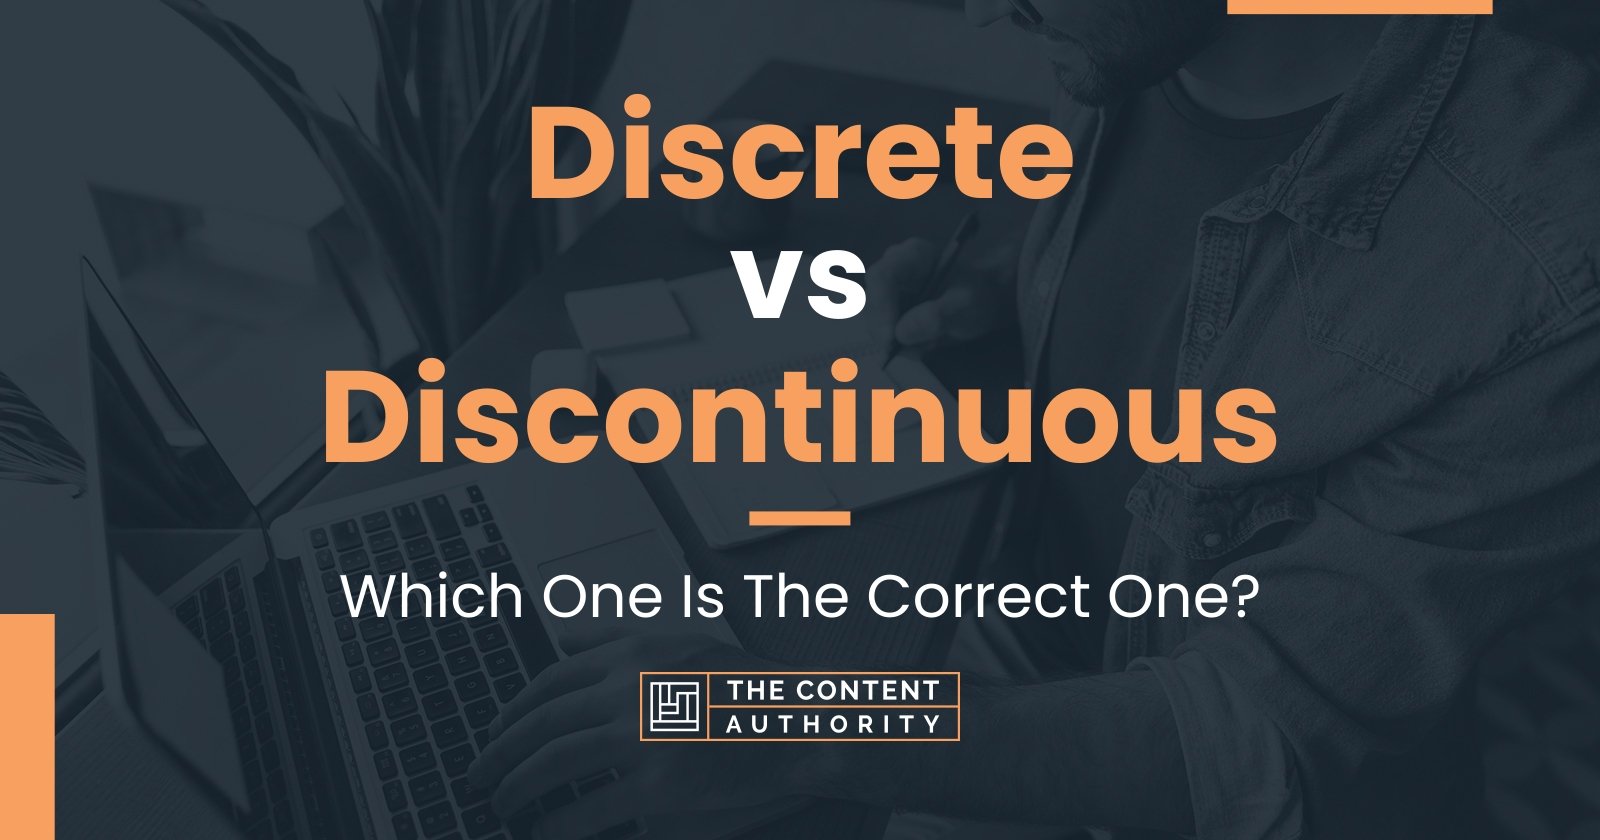 Discrete vs Discontinuous: Which One Is The Correct One?